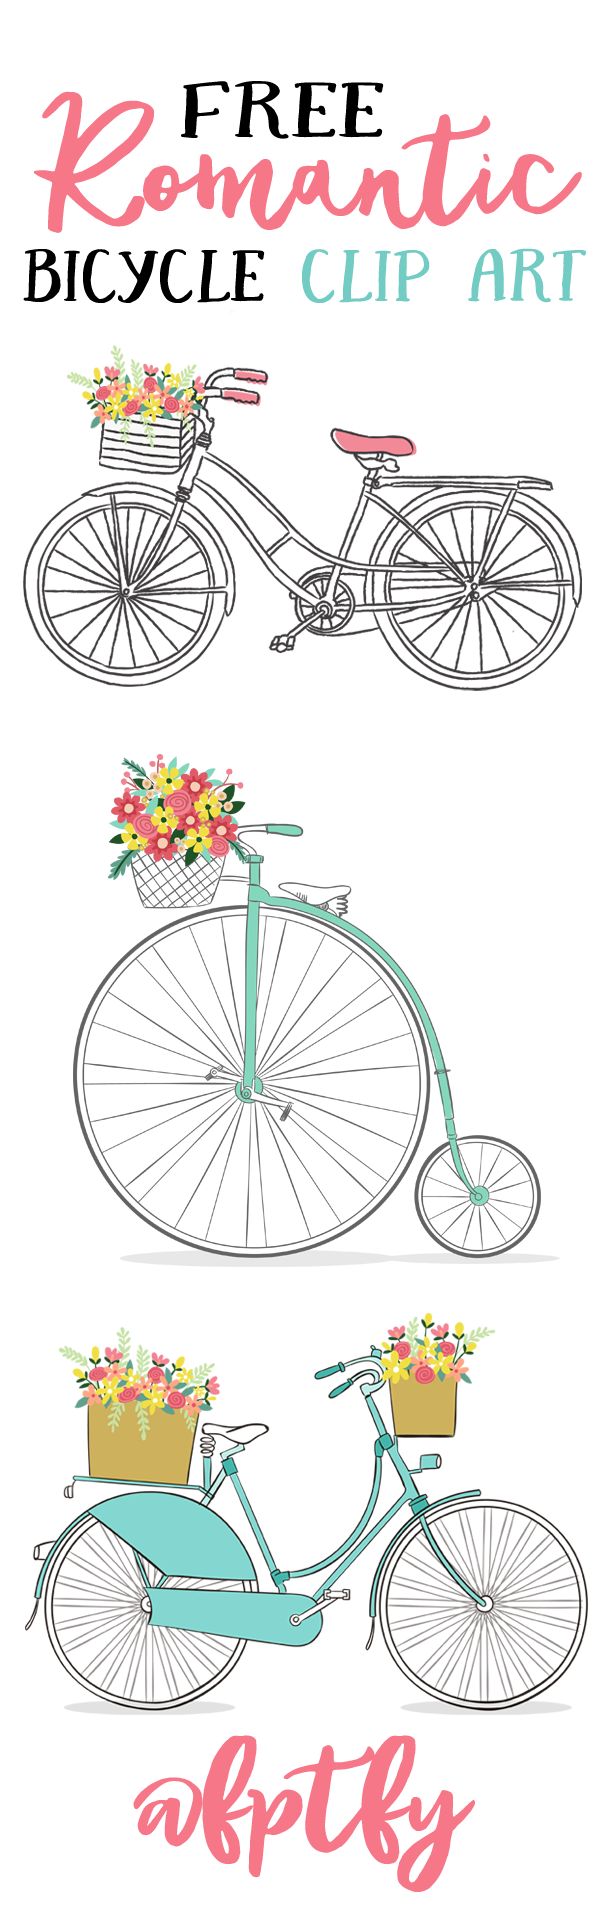 bicycle clipart bicyle